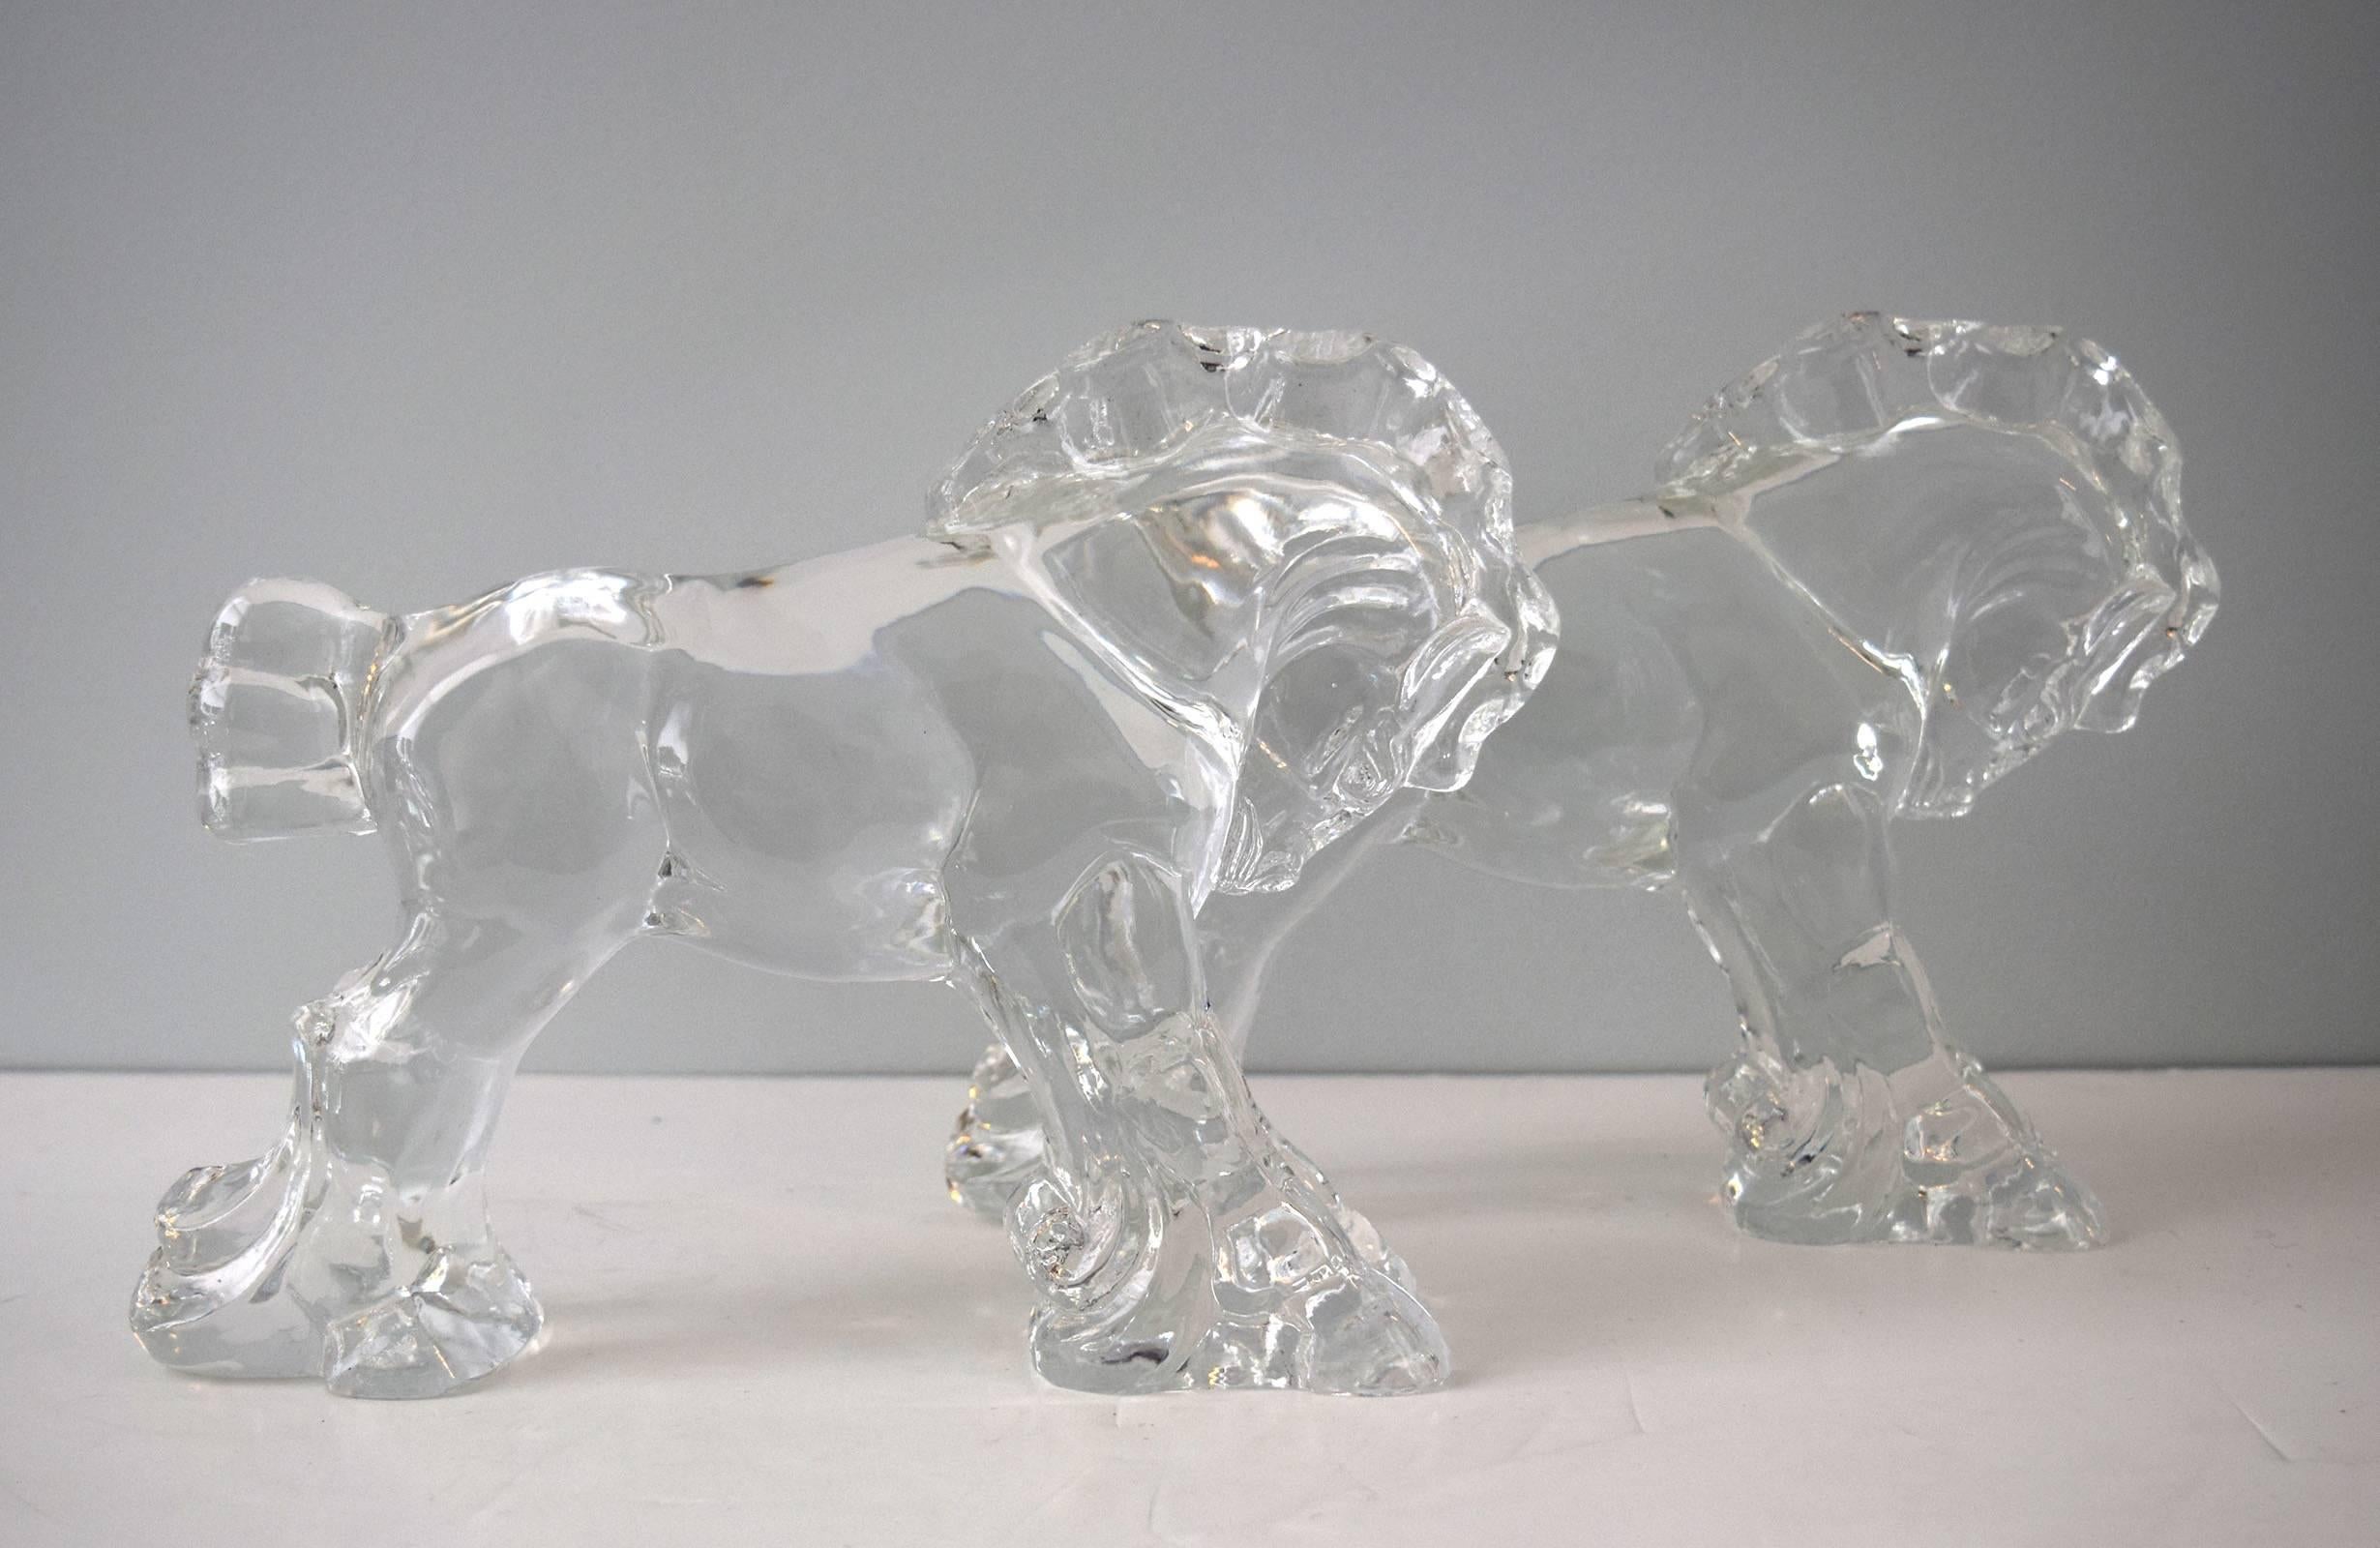 One of the tabletop size glass horse sculptures bears the diamond-etched Steuben mark. The model also appears in the firm’s catalogue of designs. This pair came from the mirrored ballroom of the historic Livingston-Griggs house on Summit Avenue in